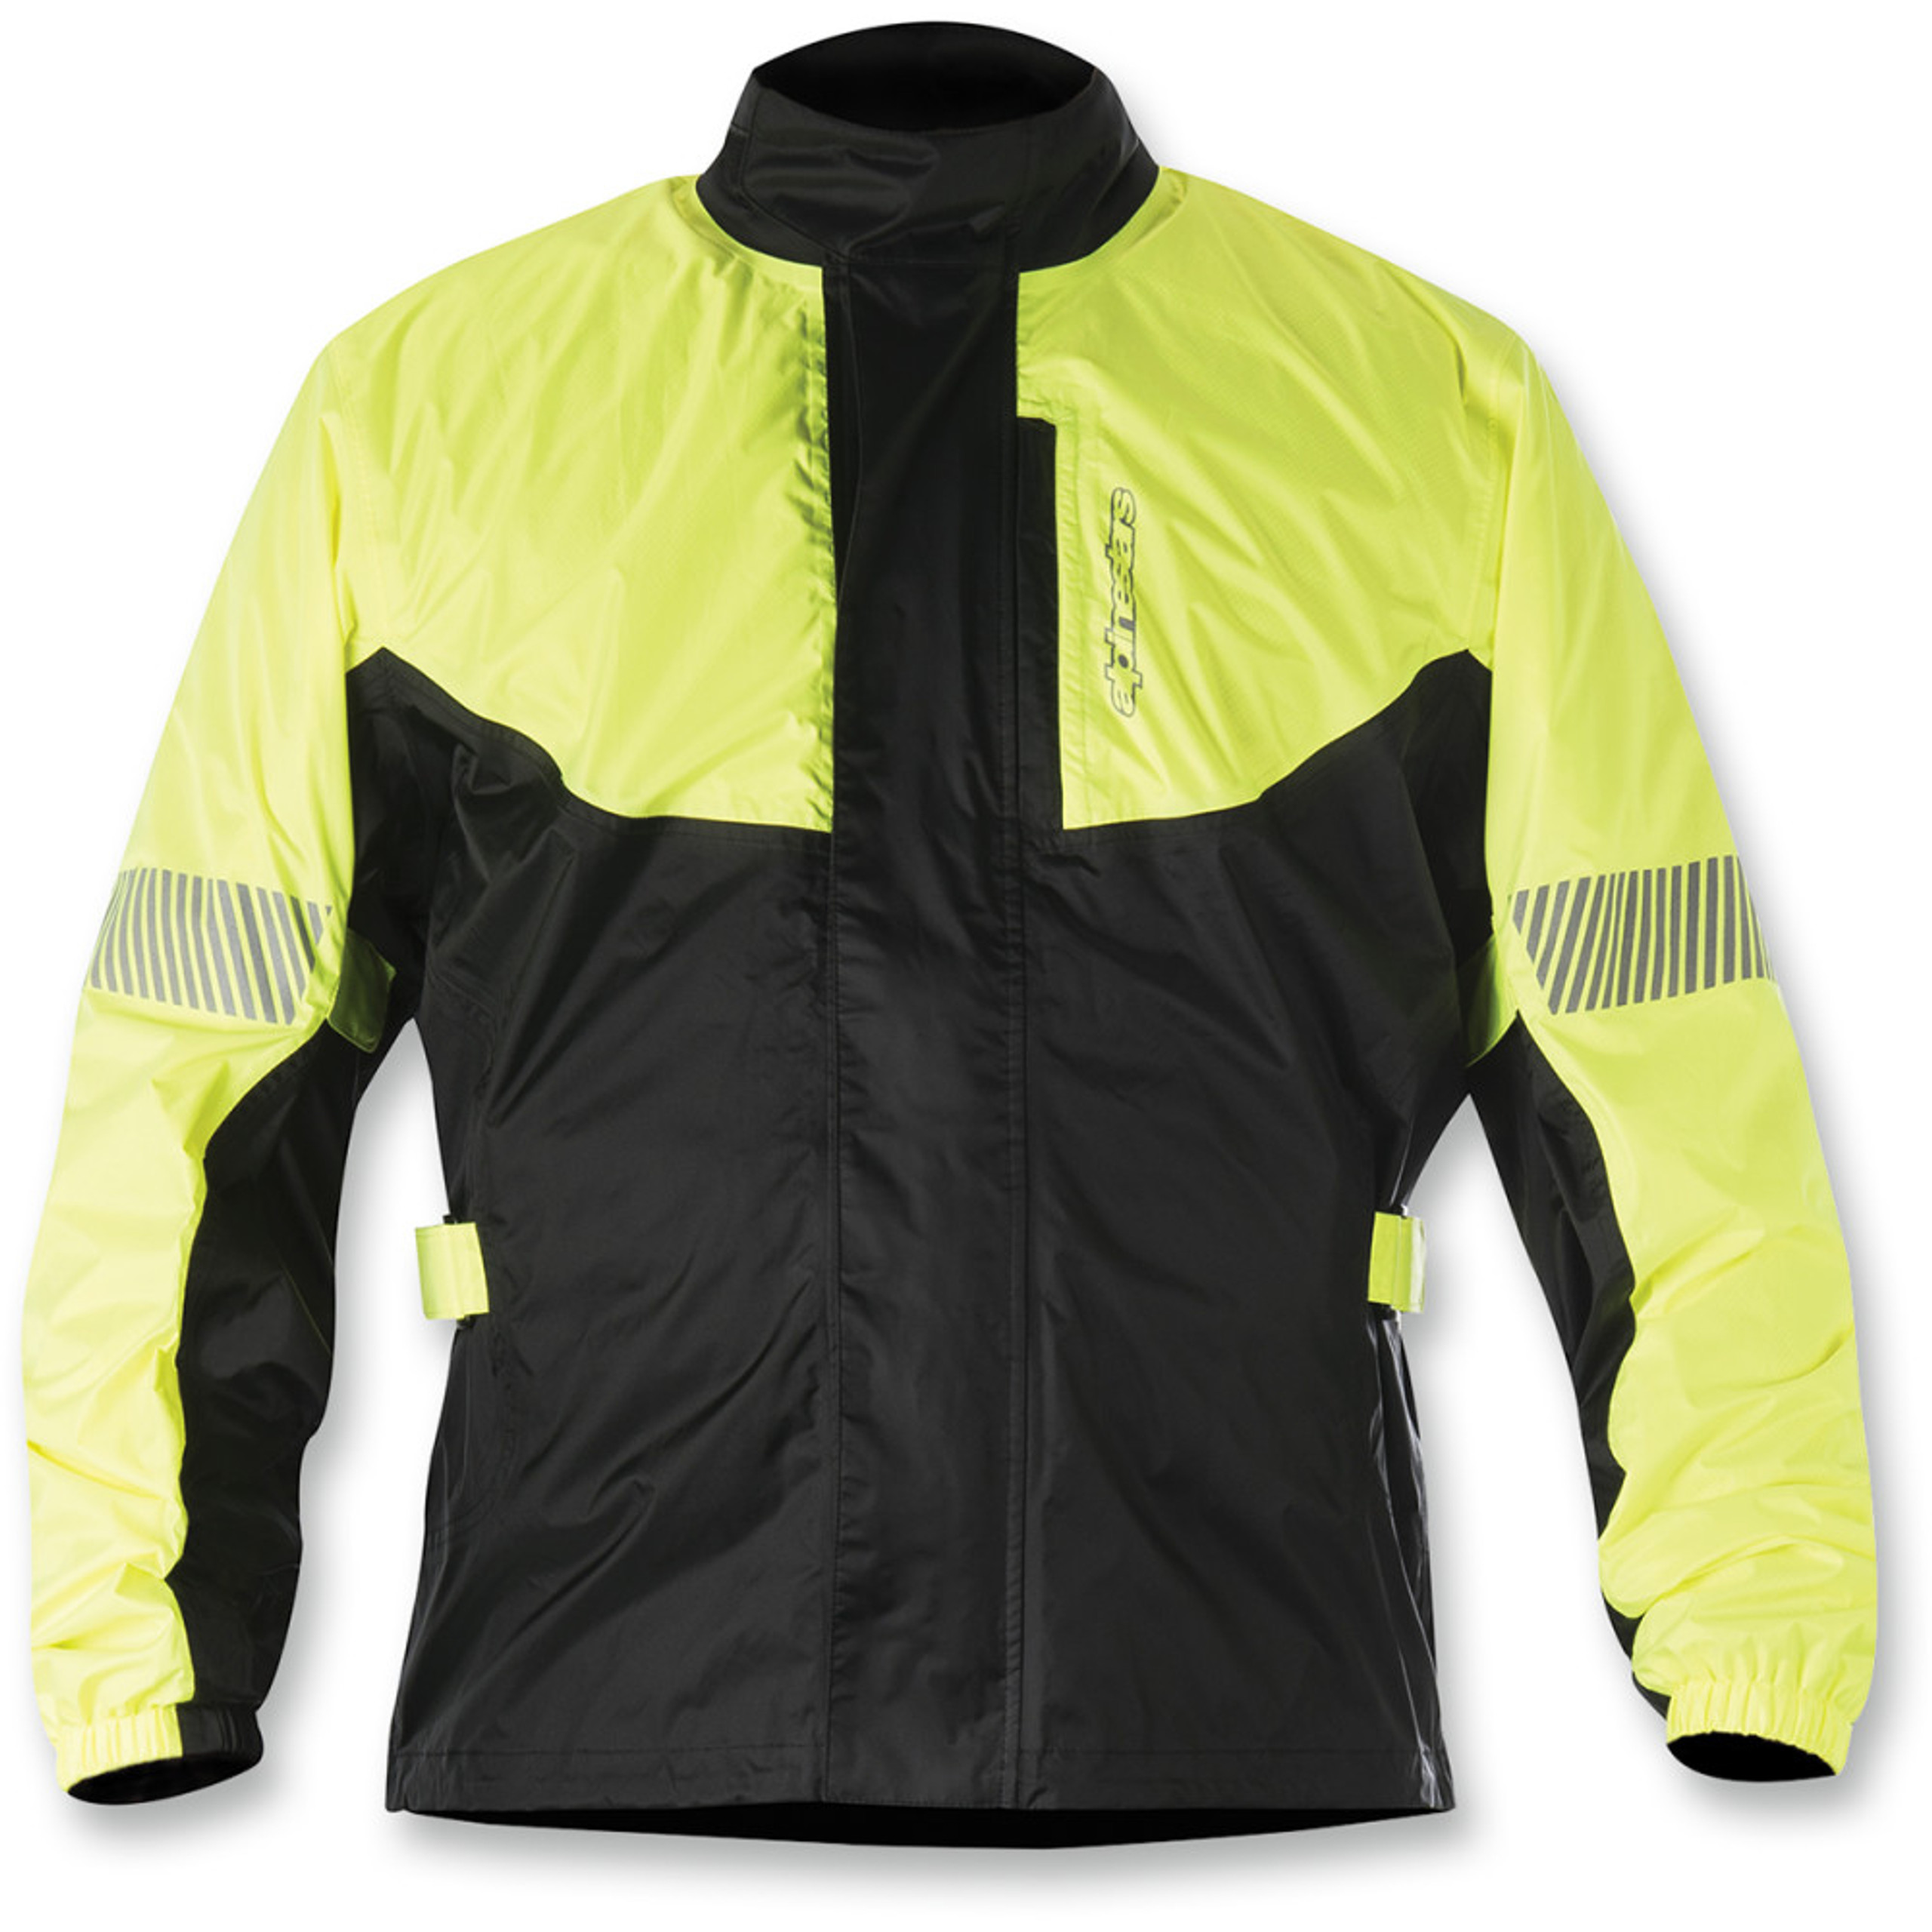 Motorcycle Rain Gear - Get Lowered Cycles